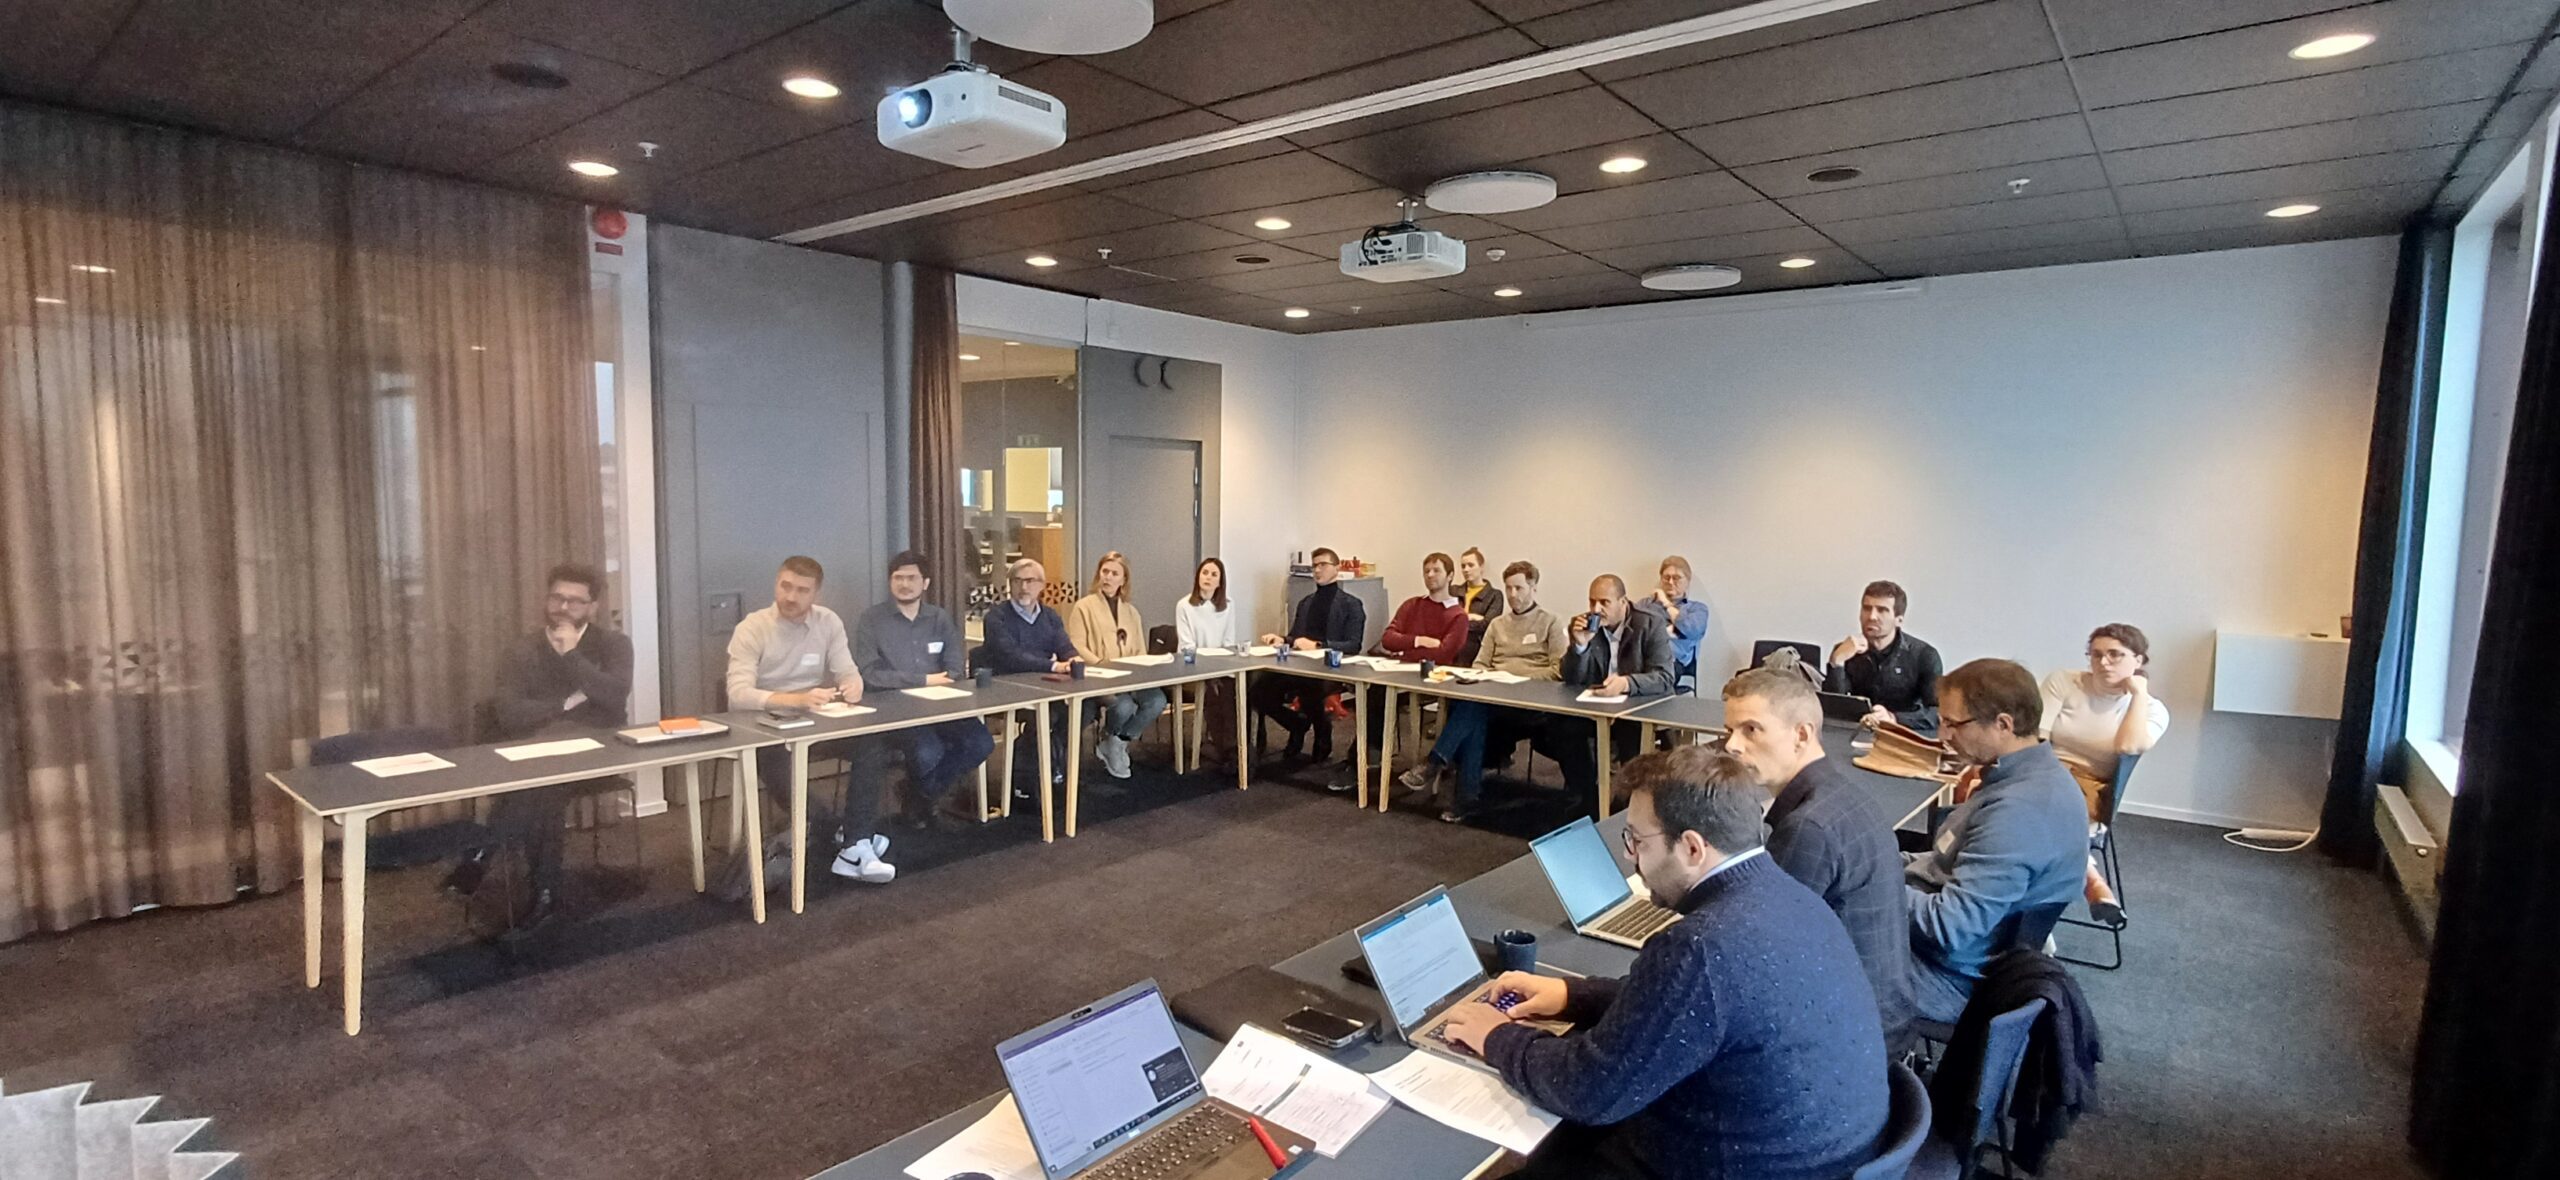 Classroom session in Lund, hosted by Trivector